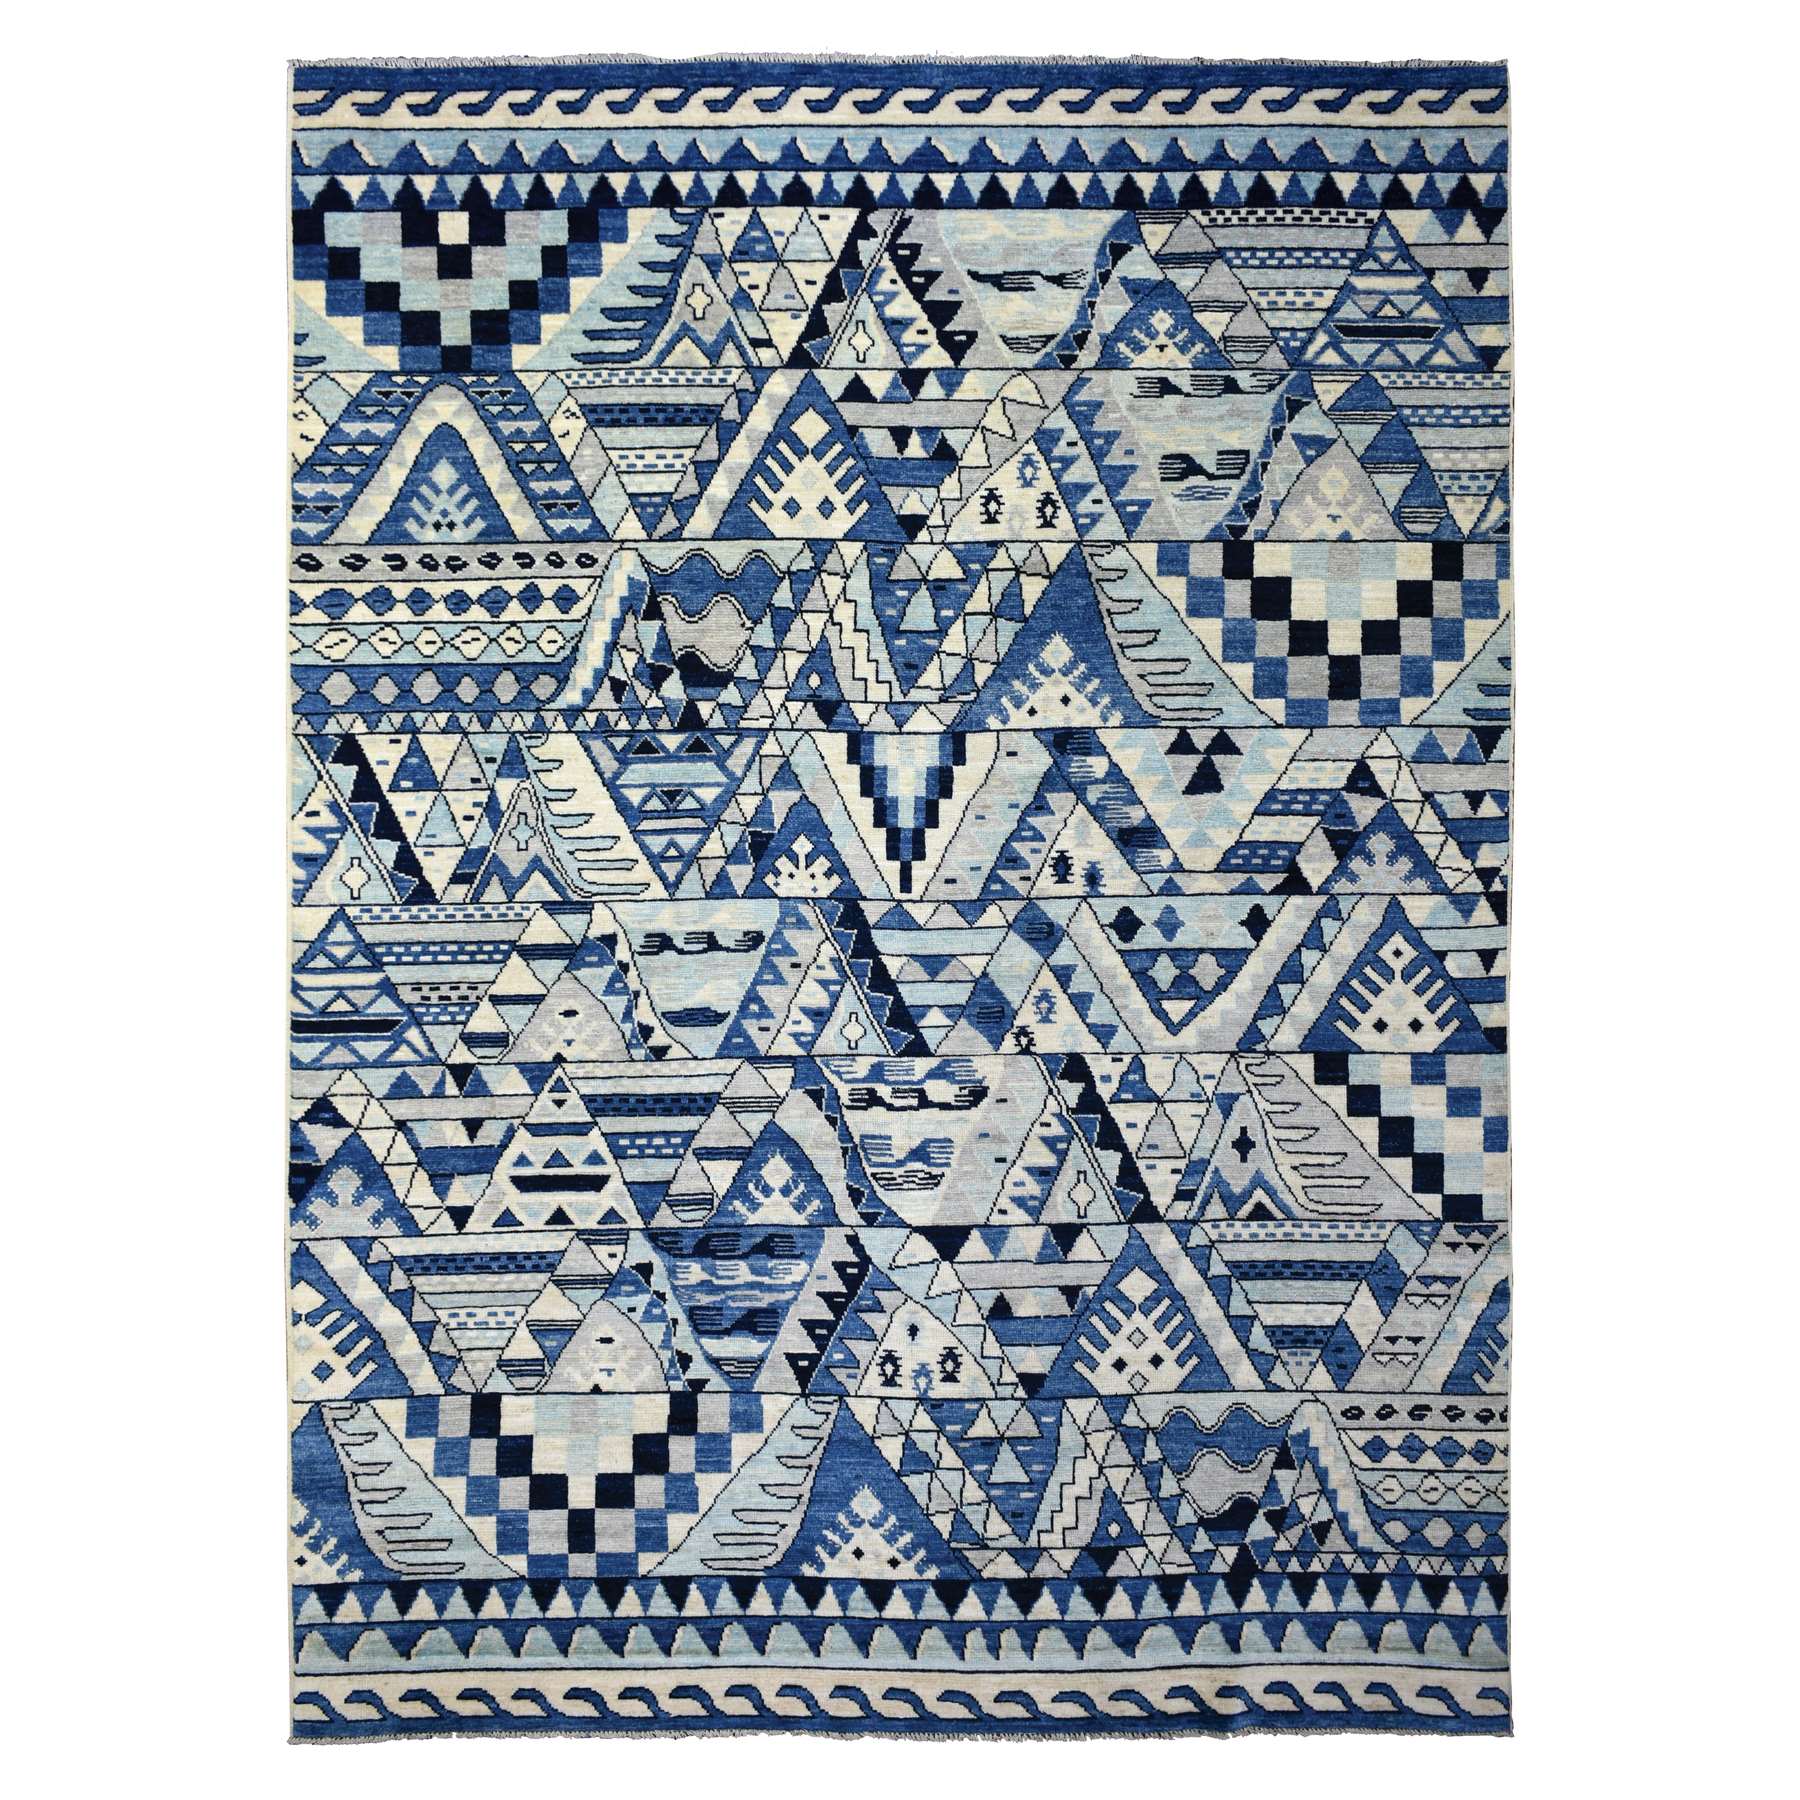 9'x12' Denim Blue, Anatolian Village Inspired Geometric Style Natural Dyes, Soft Wool Hand Woven, Oriental Rug 